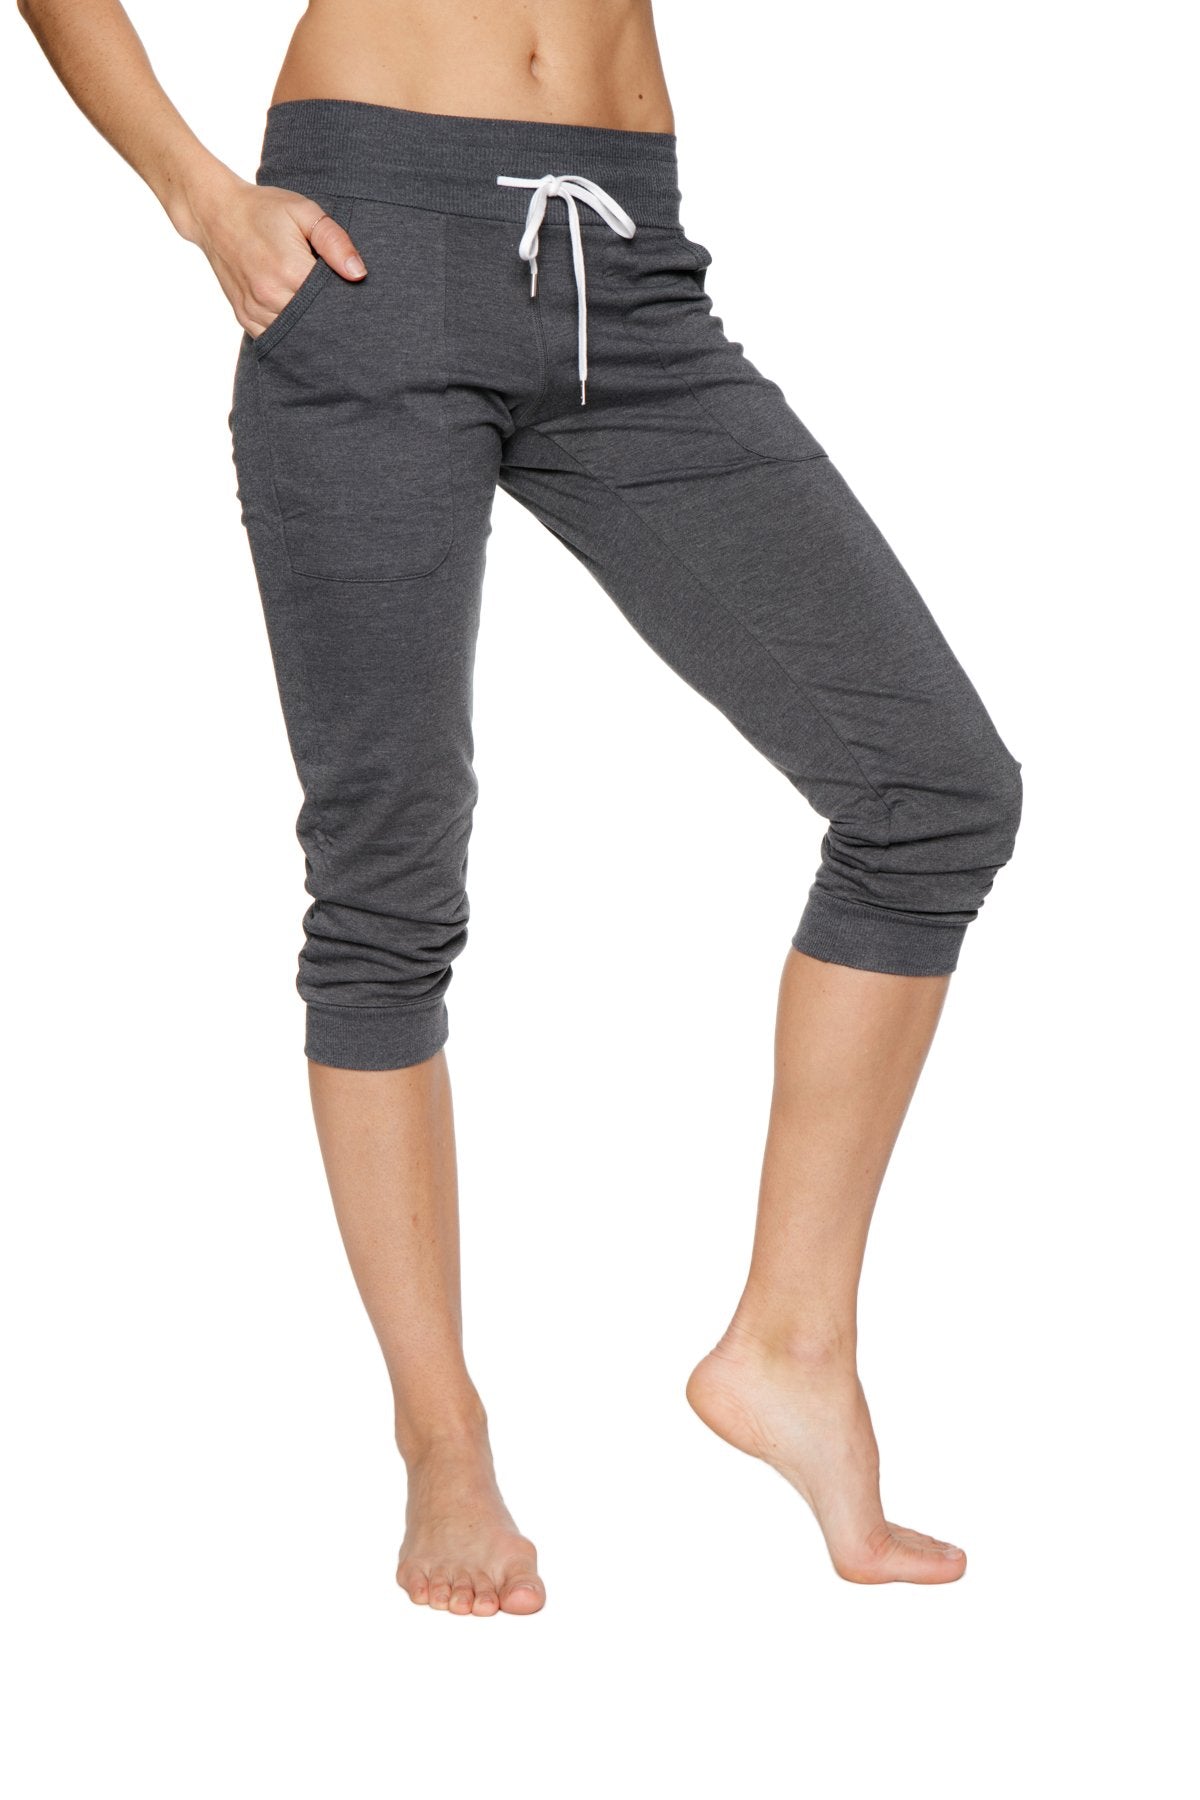 Women's Cuffed Jogger Yoga Pant (Solid Charcoal) - 4-rth